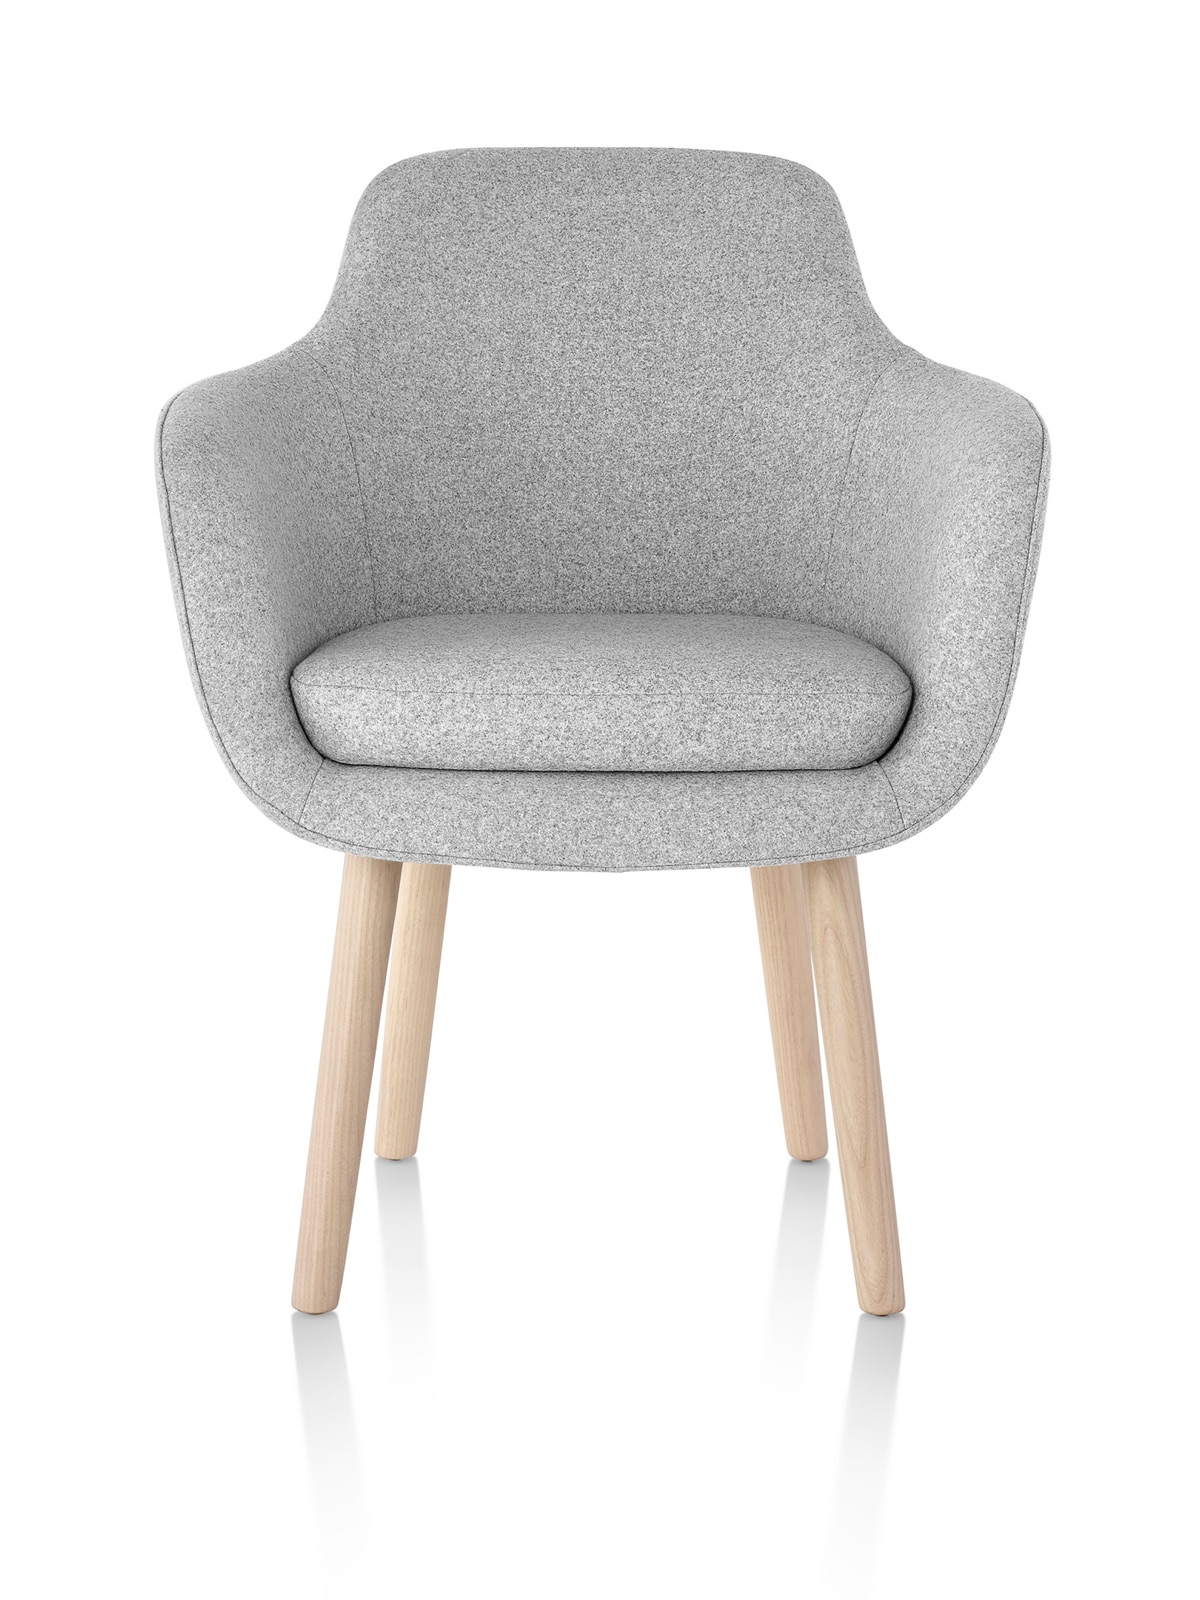 A light gray Saiba Side Chair, featuring an upholstered bucket seat and wood legs, viewed from the front.